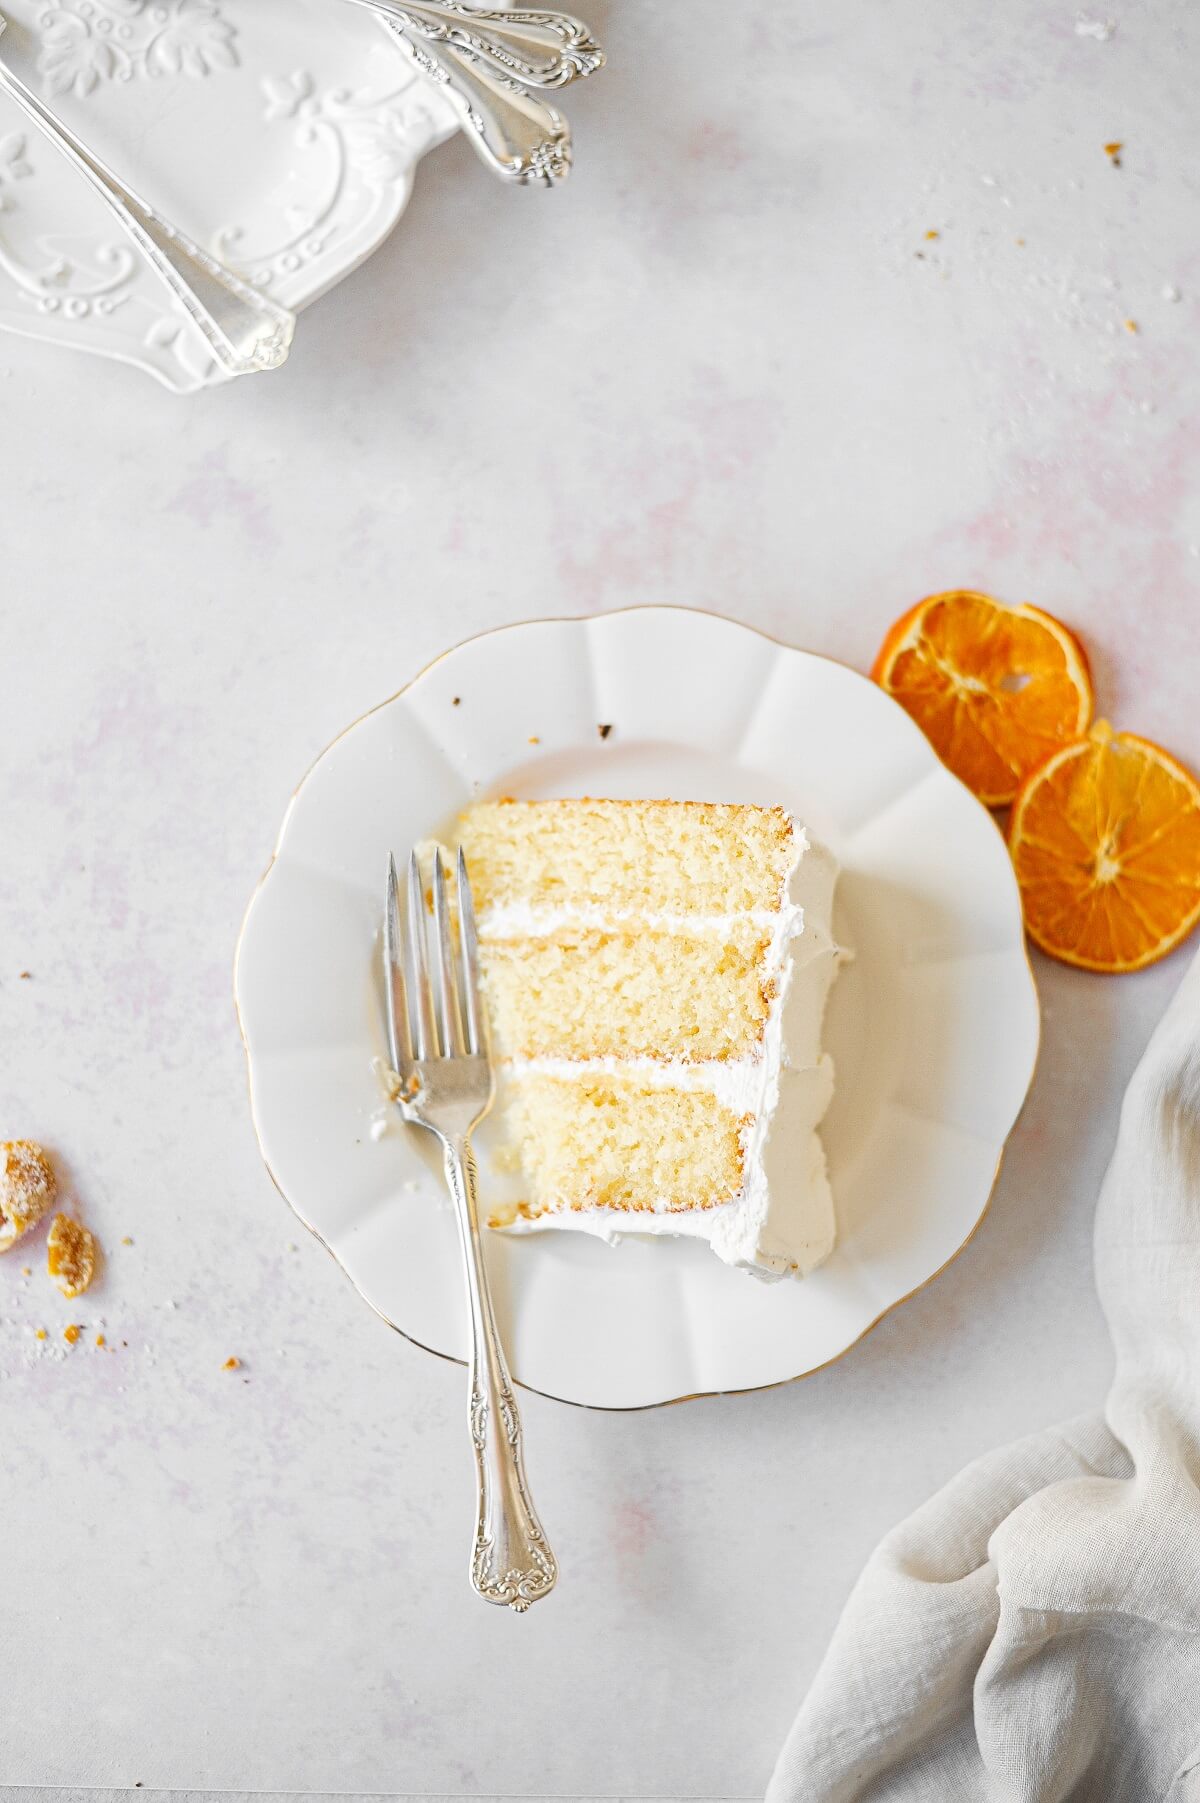 A slice of orange layer cake on a white plate, with dried orange slices scattered around.